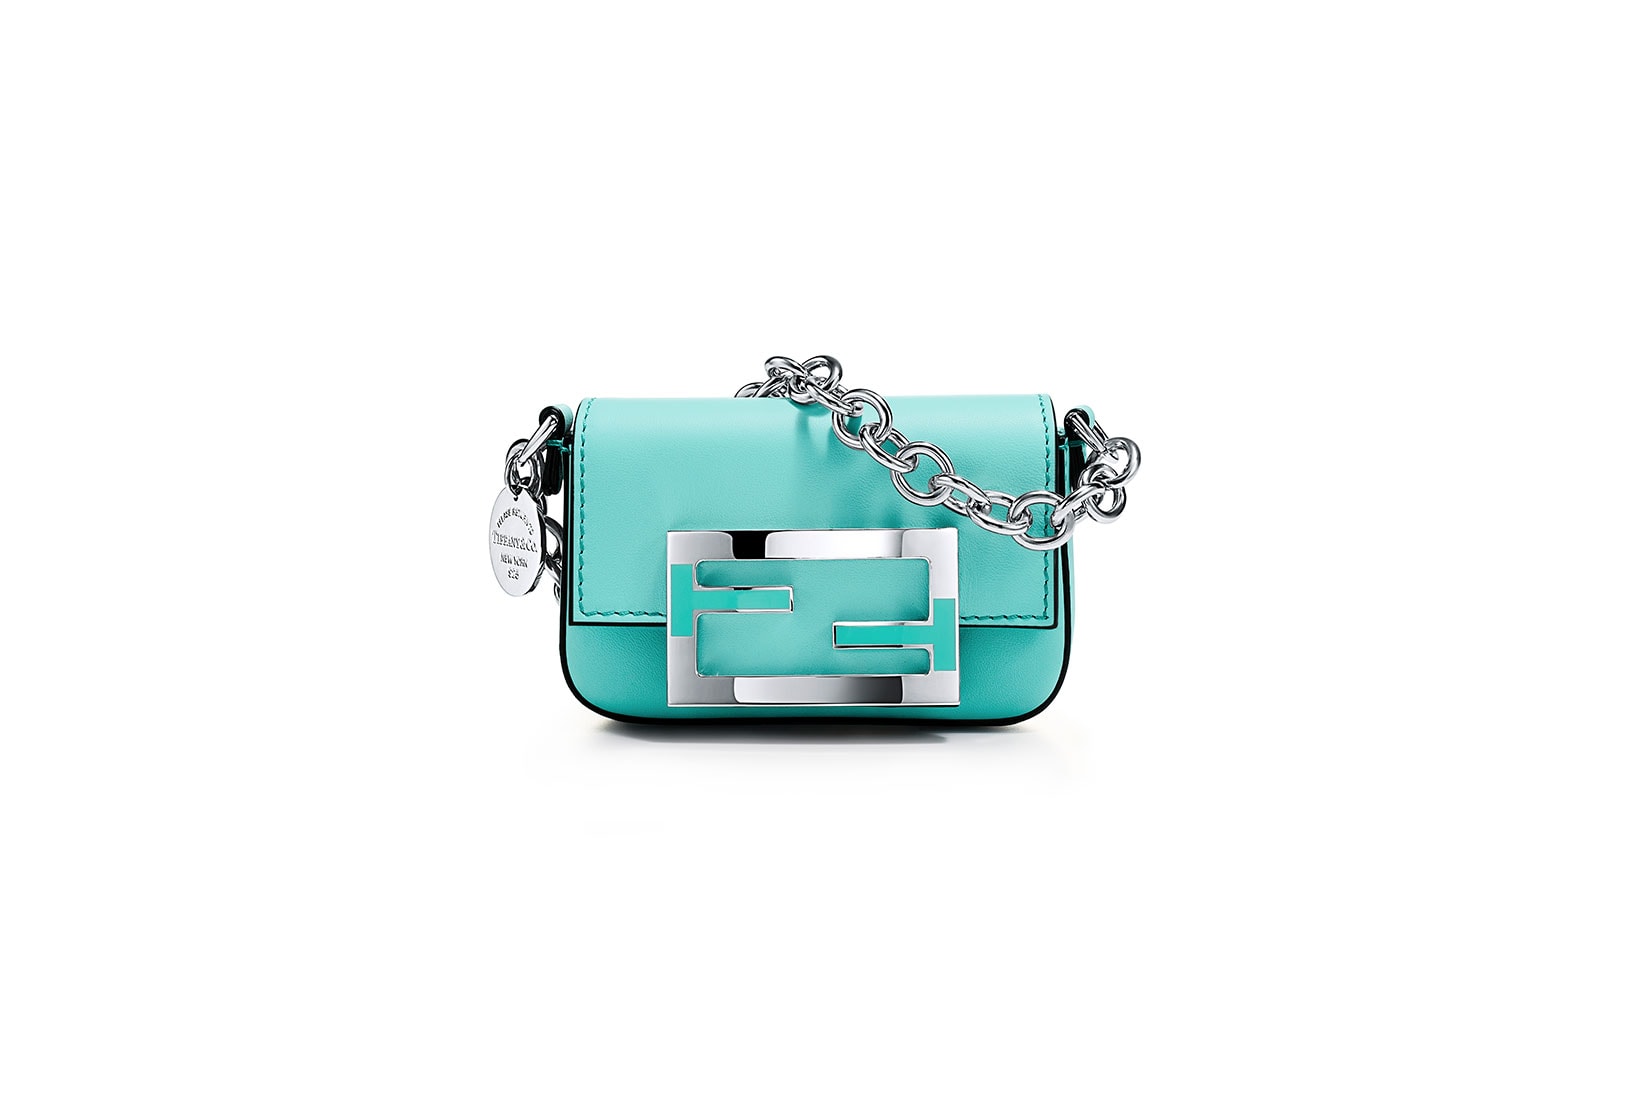 Fendi Tiffany Co Blue Baguette Handbags Hand in Hand Makers Collaboration Release Price Where to buy